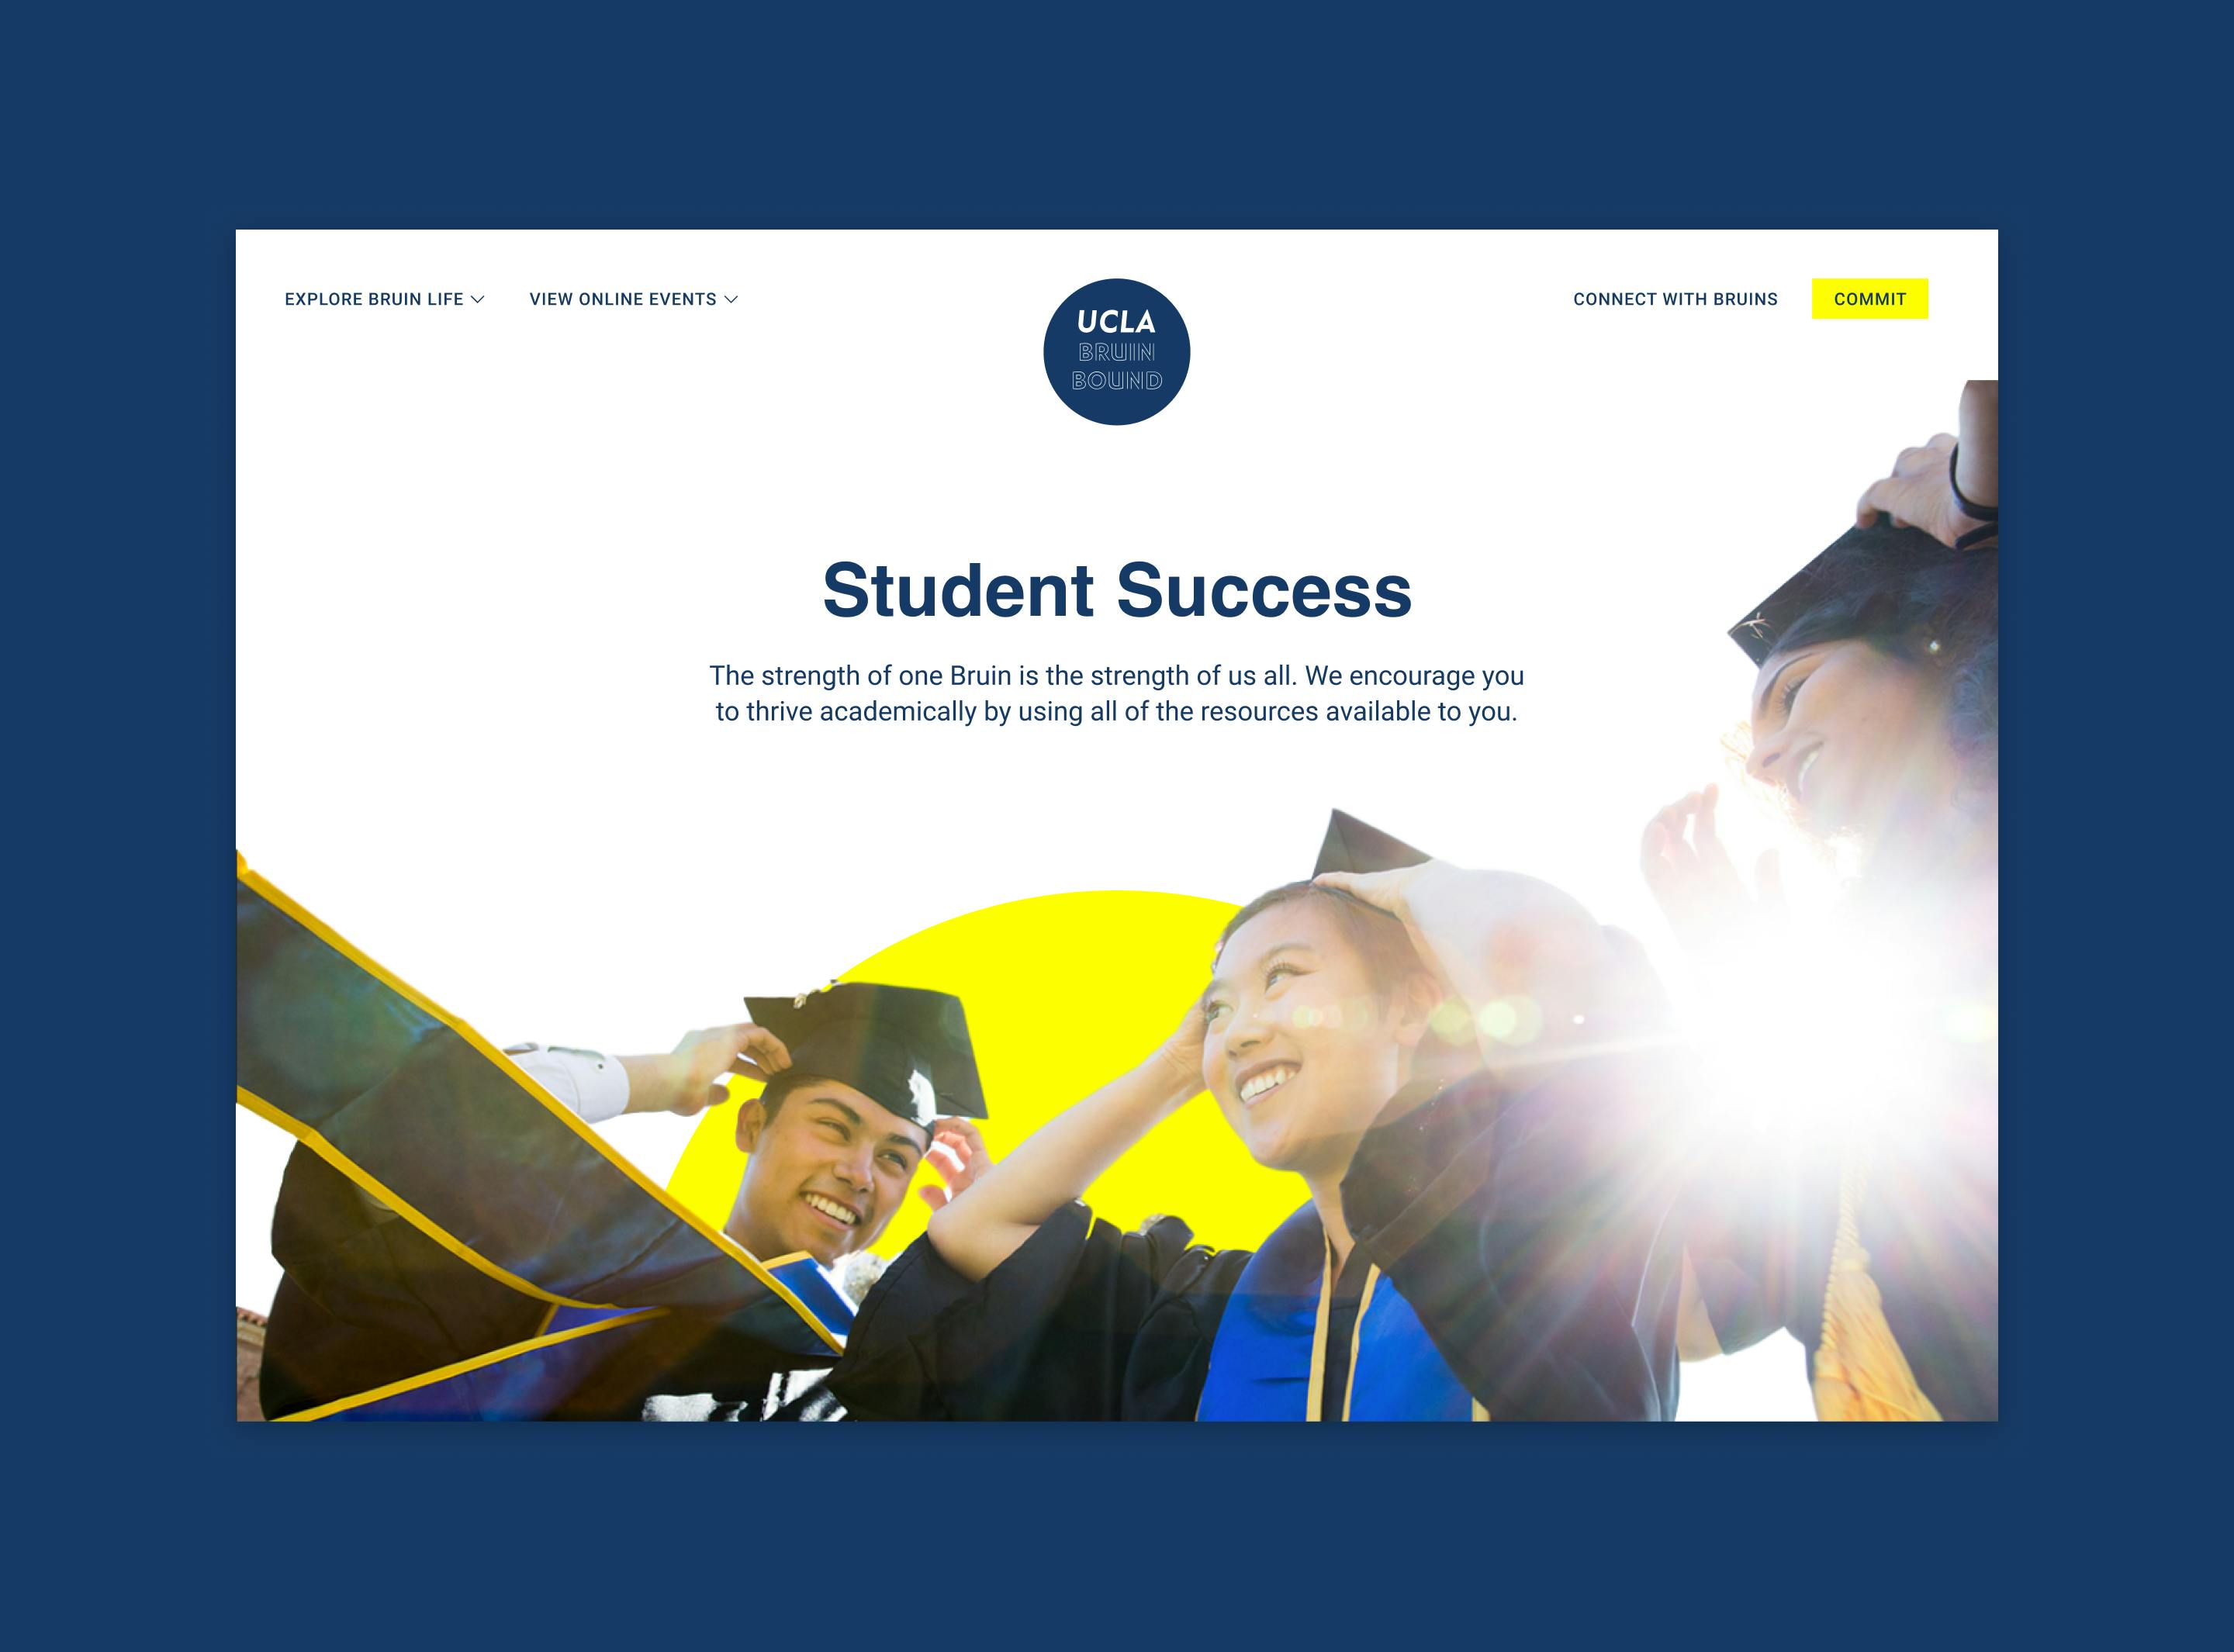 Image of UCLA Website on navy background. There is a Bruin Bound logo up top, and copy says Student Success The strength of one Bruin is the strength of us all. We encourage you to thrive academically by using all of the resources available to you. Underneath the text are three graduating students in cap and gown, one male and two females, all smiling.